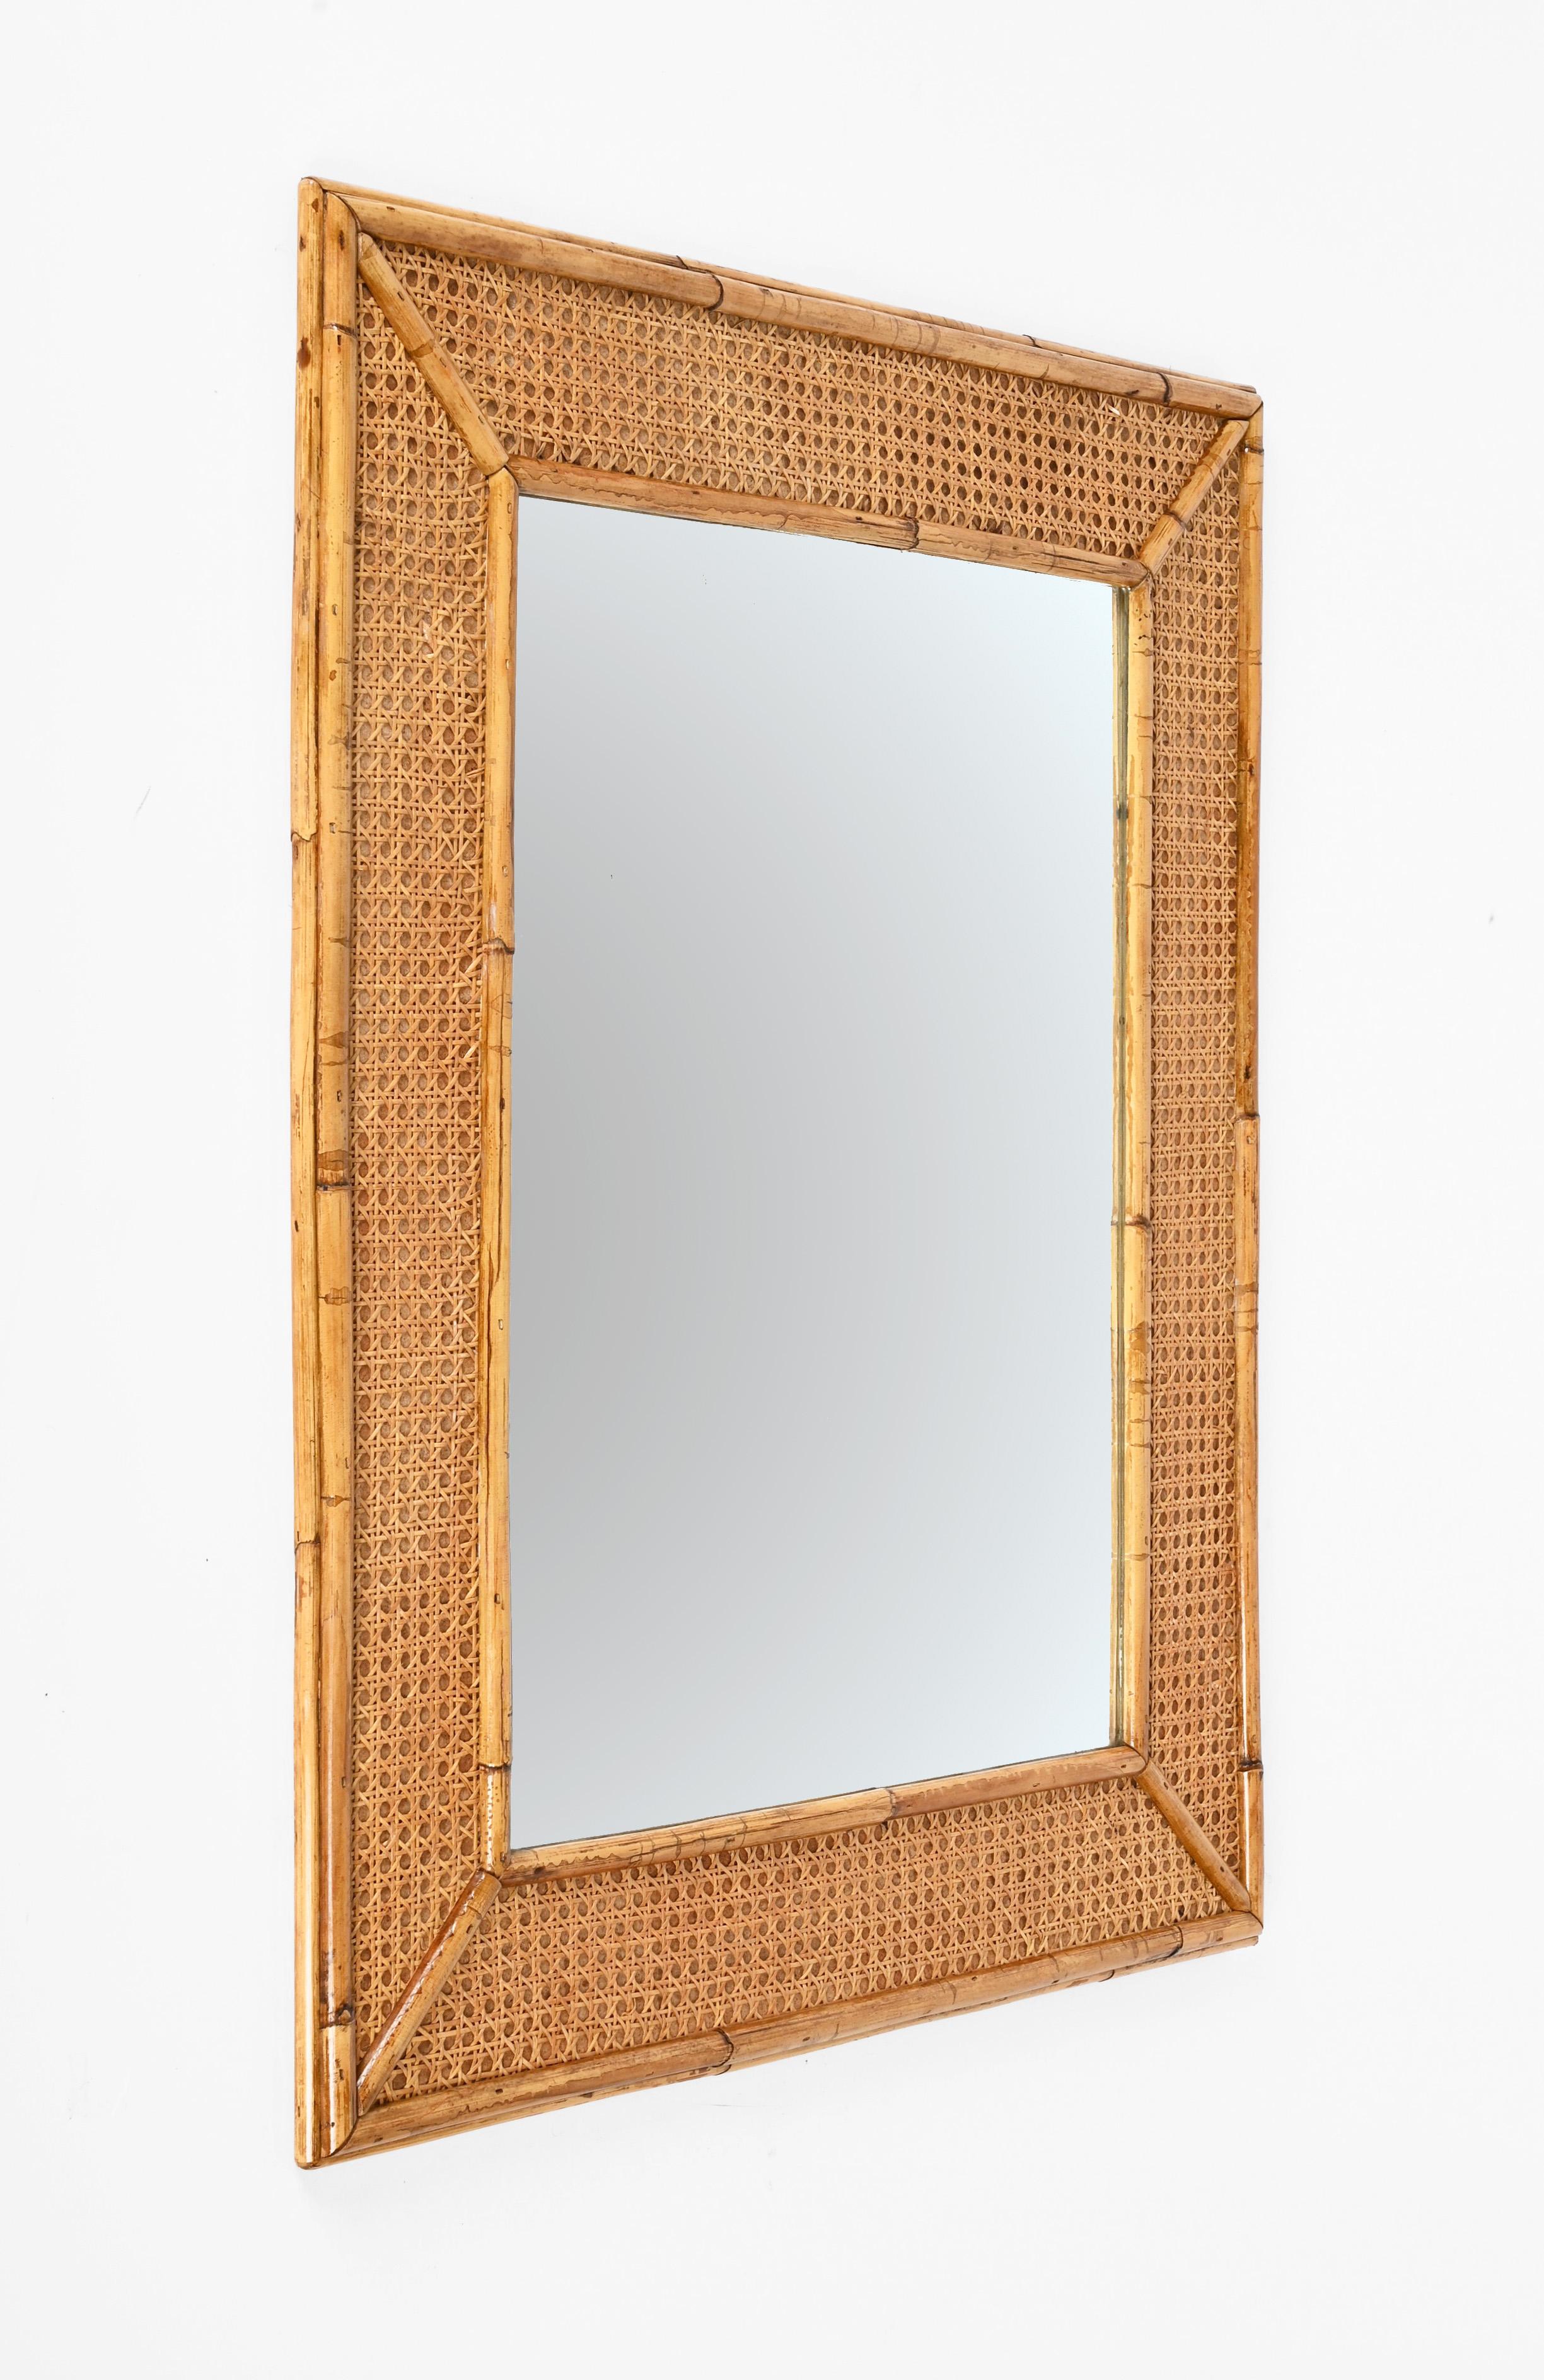 Midcentury Rectangular Italian Mirror with Bamboo and Vienna Straw Frame, 1970s For Sale 7